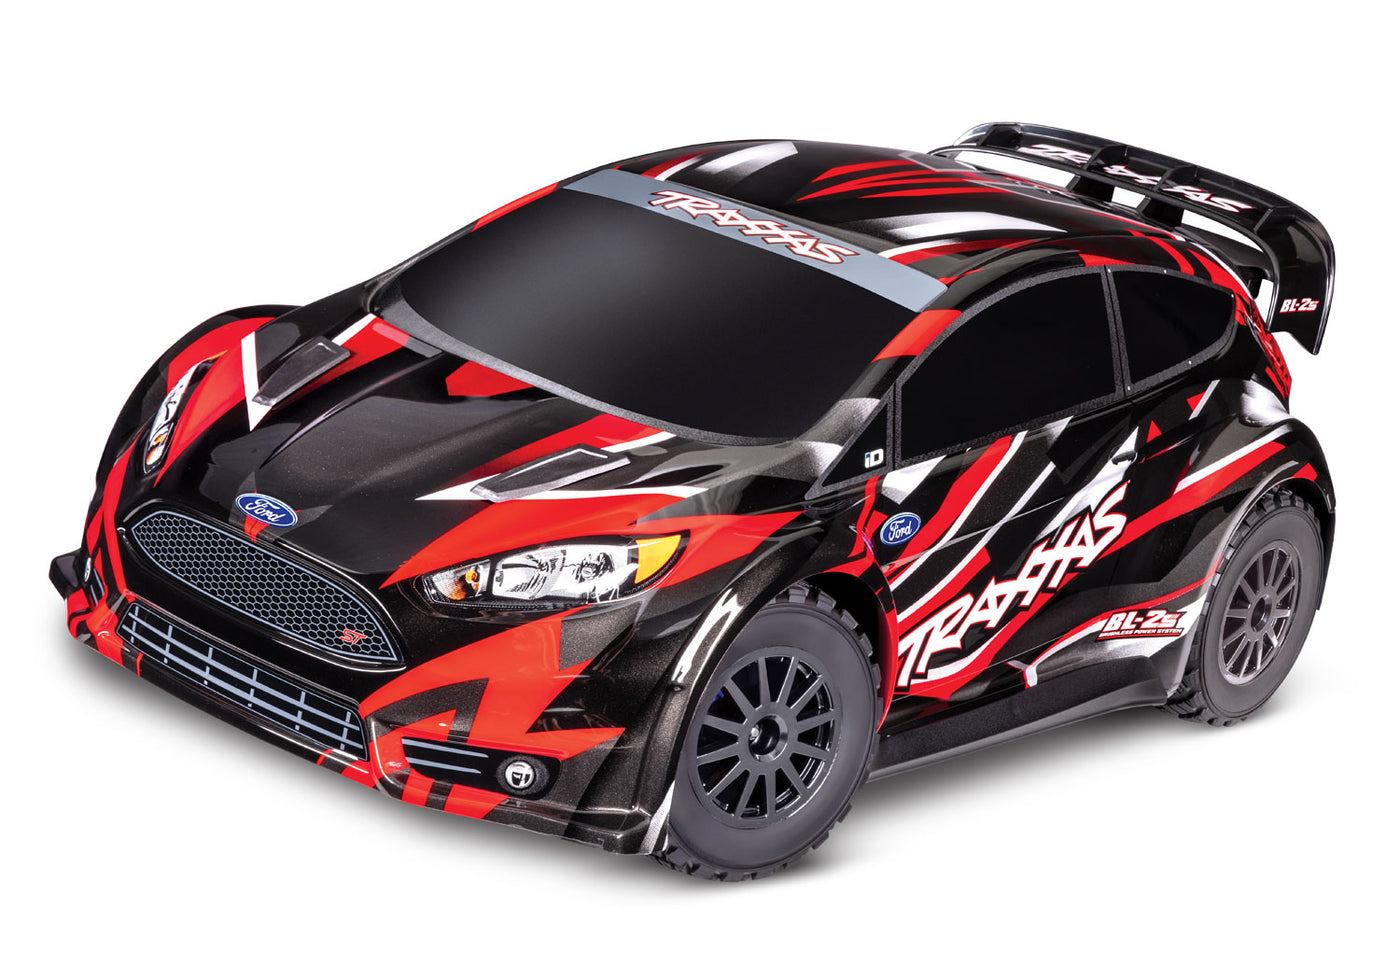 Fiesta ST Rally BL-2S Brushless: 1/10 Scale AWD Rally Car Traxxas #74154-4